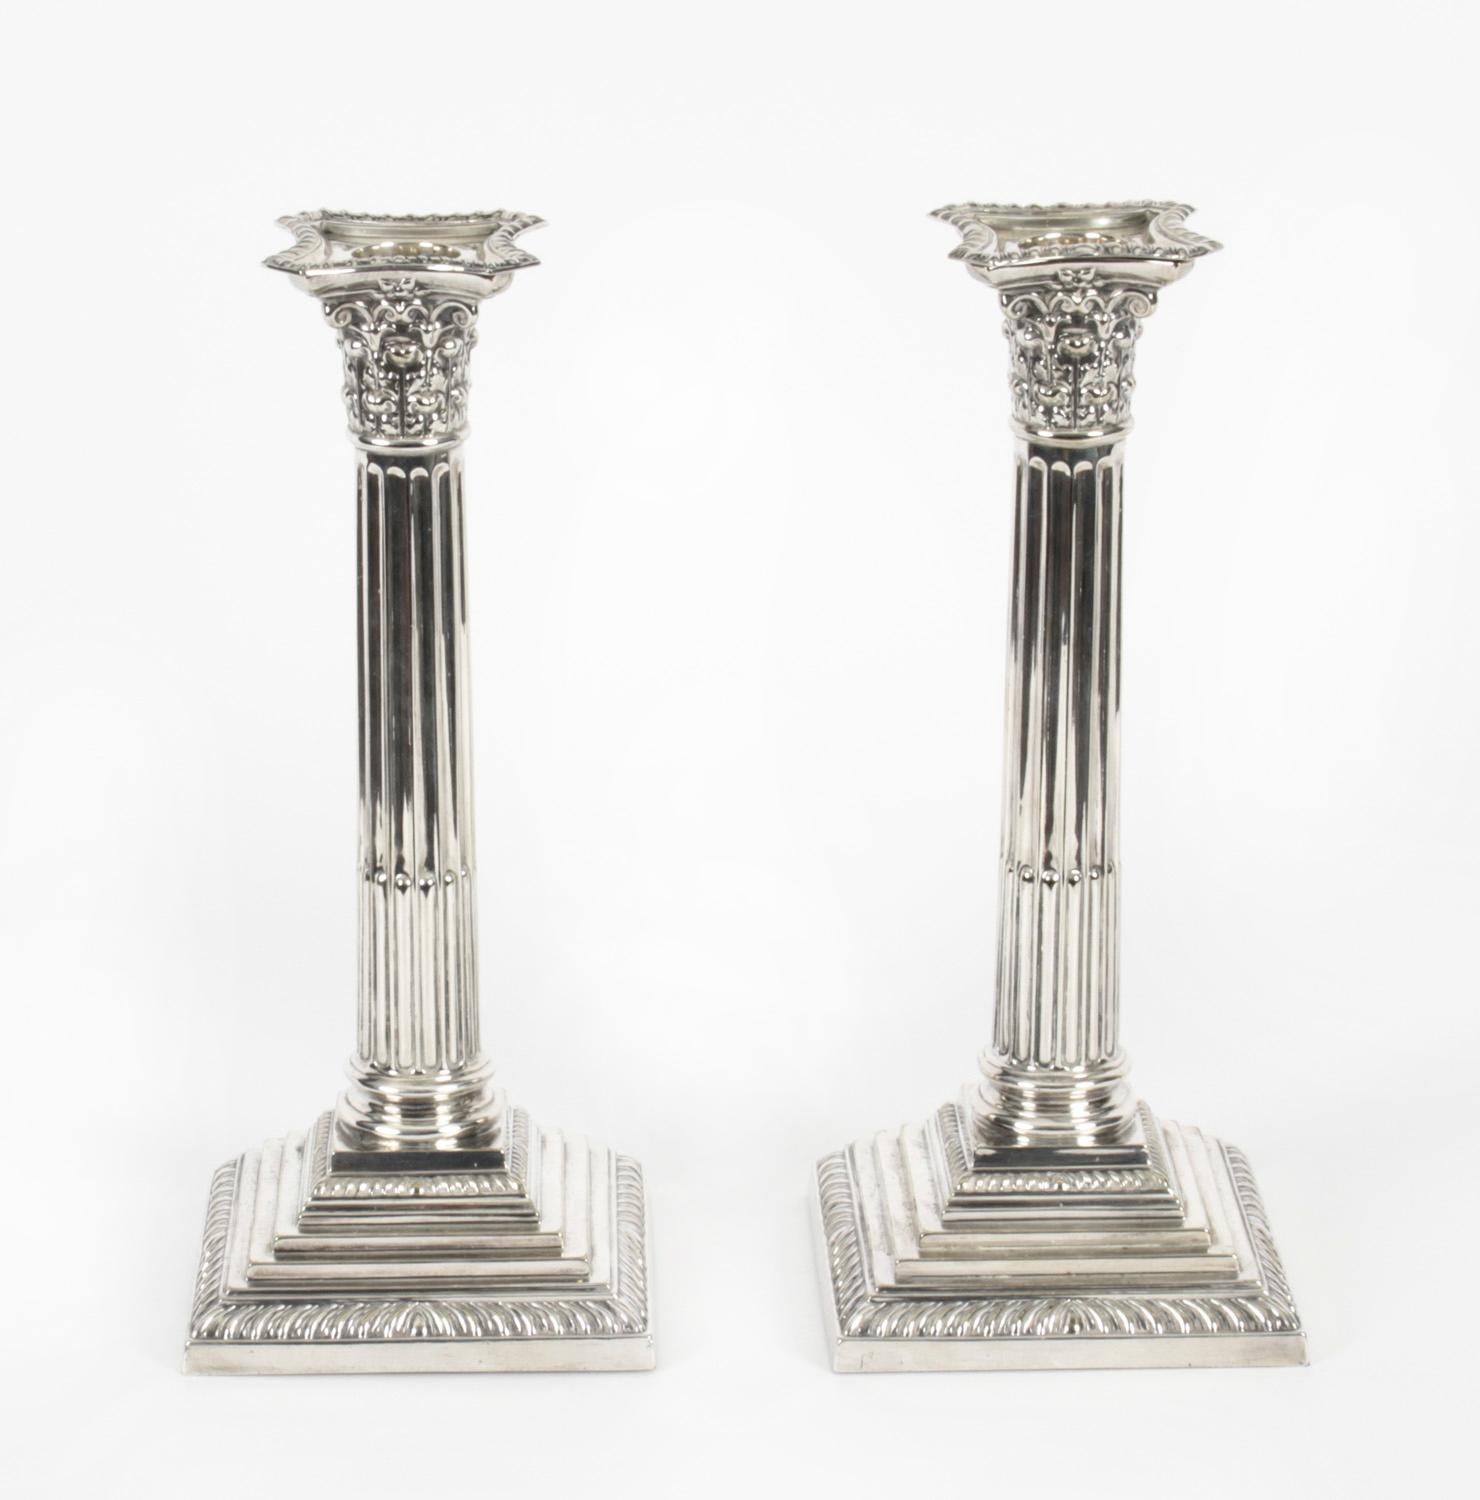 This is an exquisite Victorian pair of English antique Neoclassical design silver plated Corinthian column candlesticks, 19th Century in date.

The pair features a classic Corinthian Capitals decorated with acanthus leaves and anthemion with a